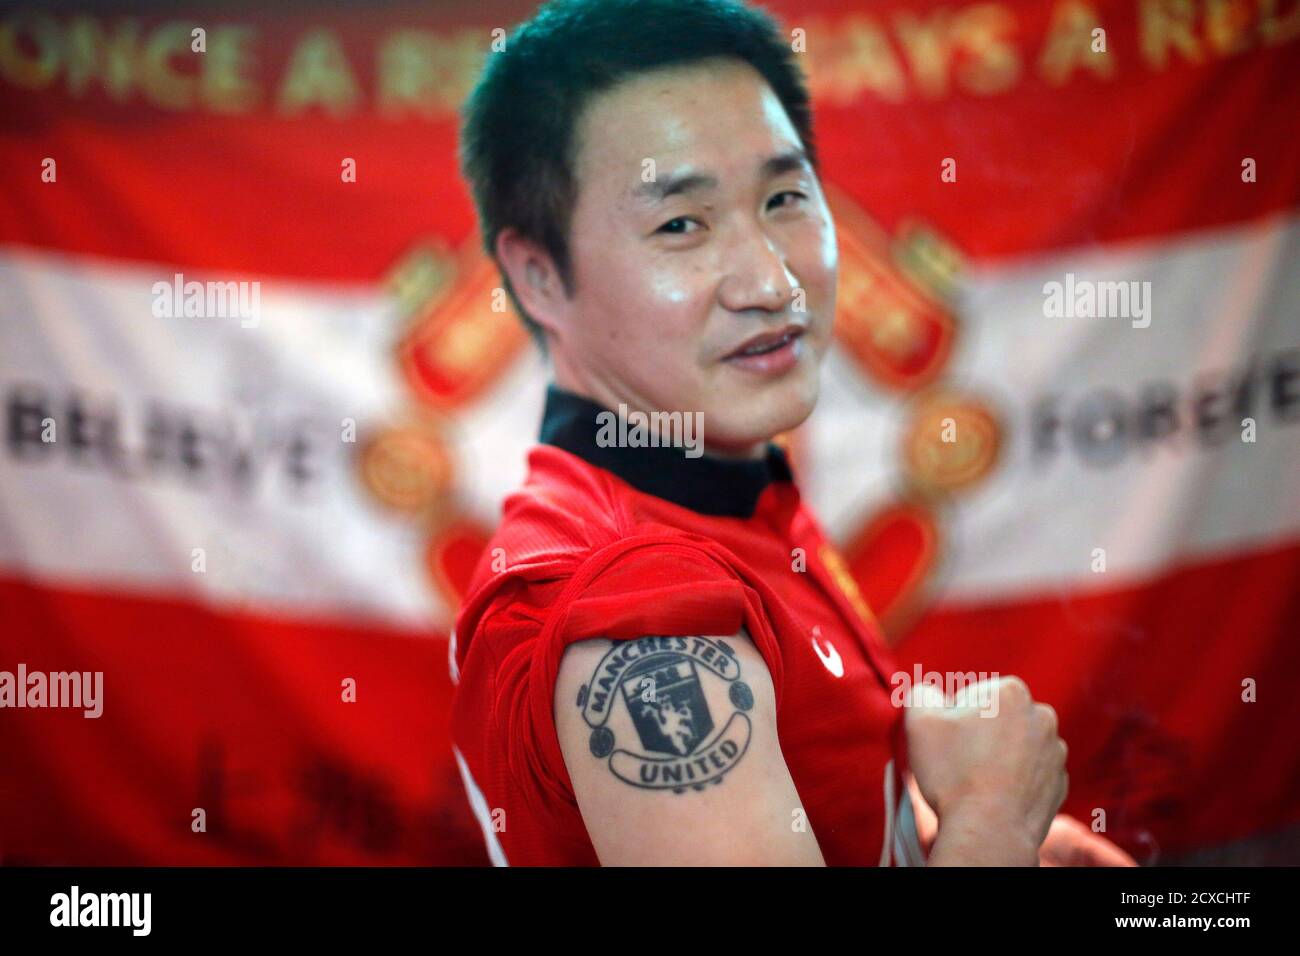 A fan of Manchester United Shanghai fan club shows his tattoo at half-time during a telecast of the team's English Premier League soccer match against Fulham at a bar in Shanghai February 10, 2014. REUTERS/Aly Song (CHINA - Tags: SOCIETY SPORT SOCCER) Stock Photo